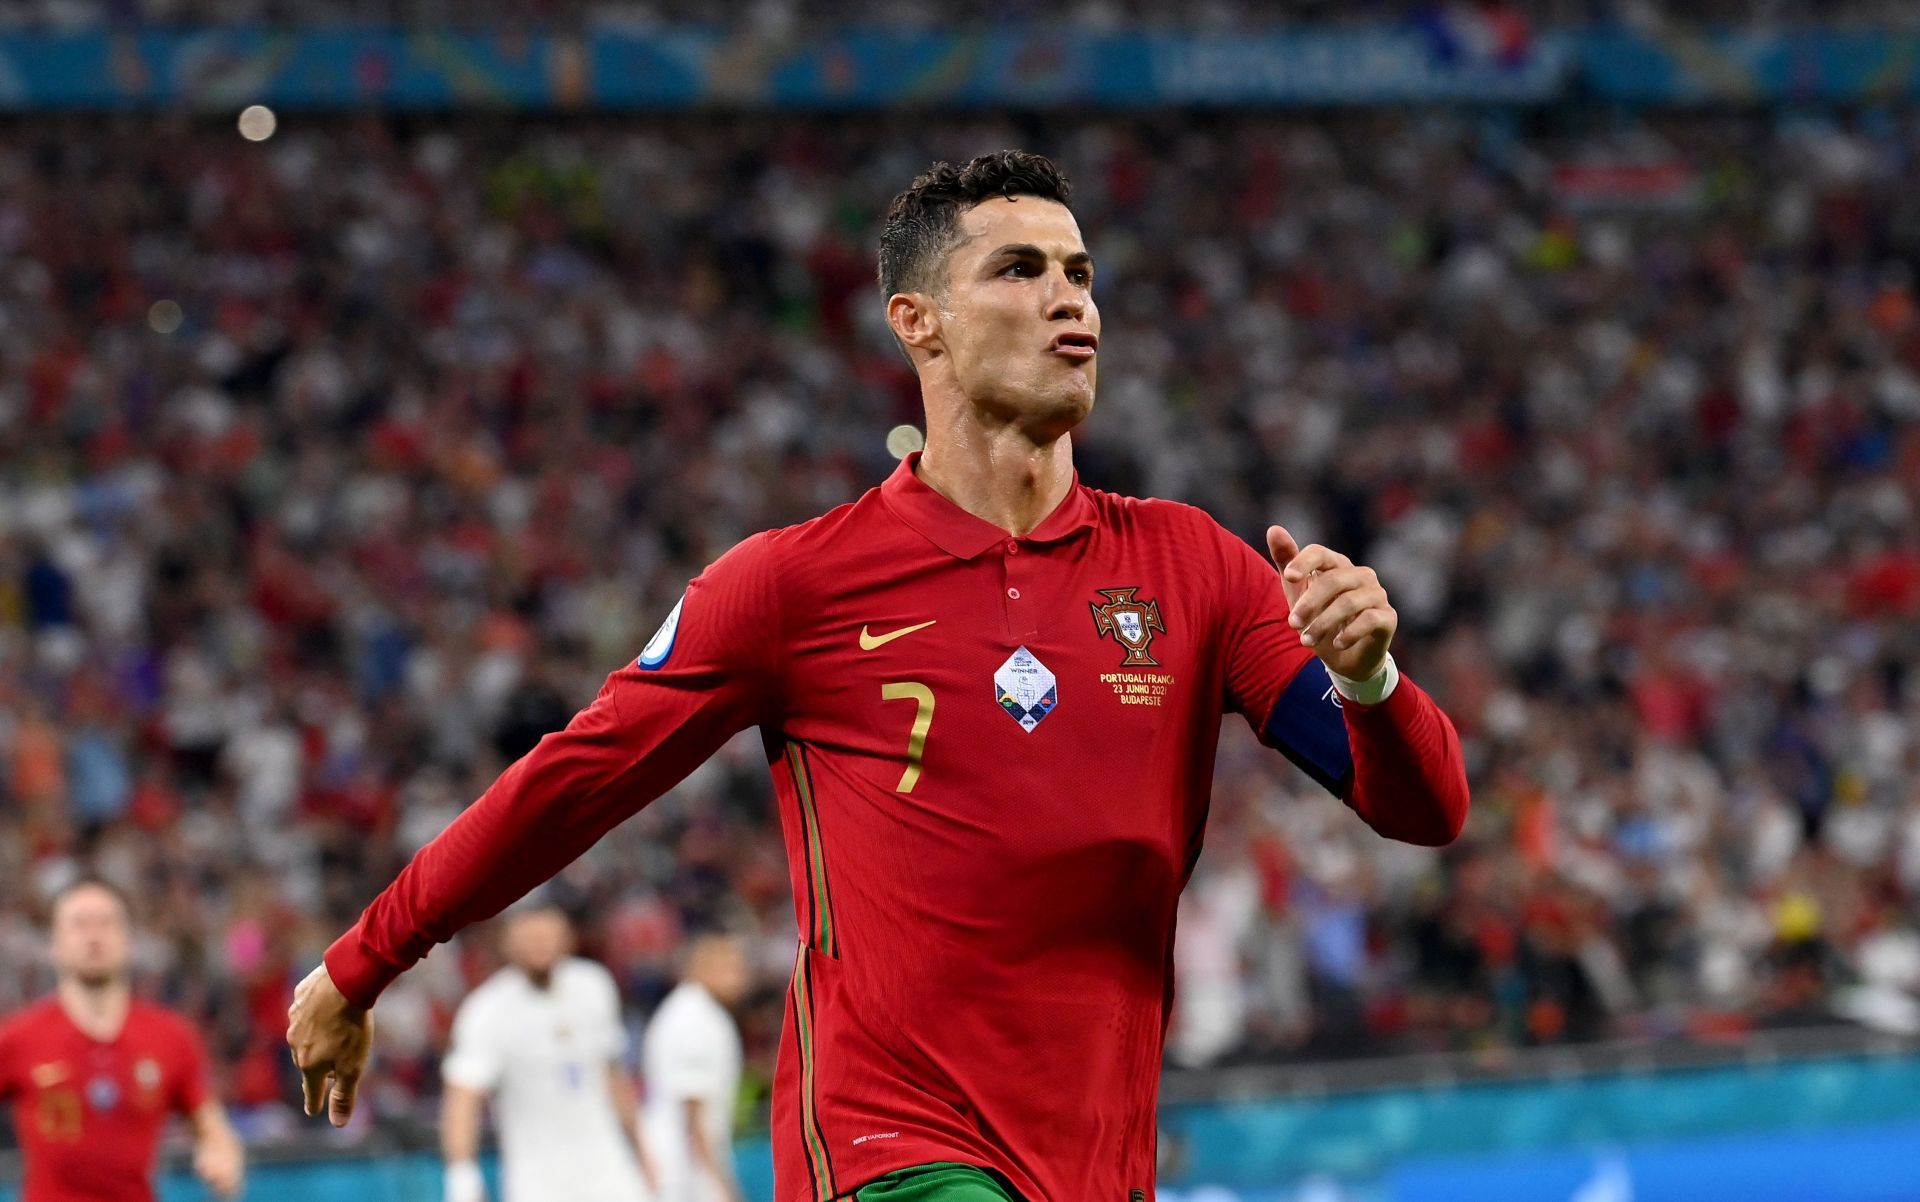 Cristiano Ronaldo has never played a World Cup final.